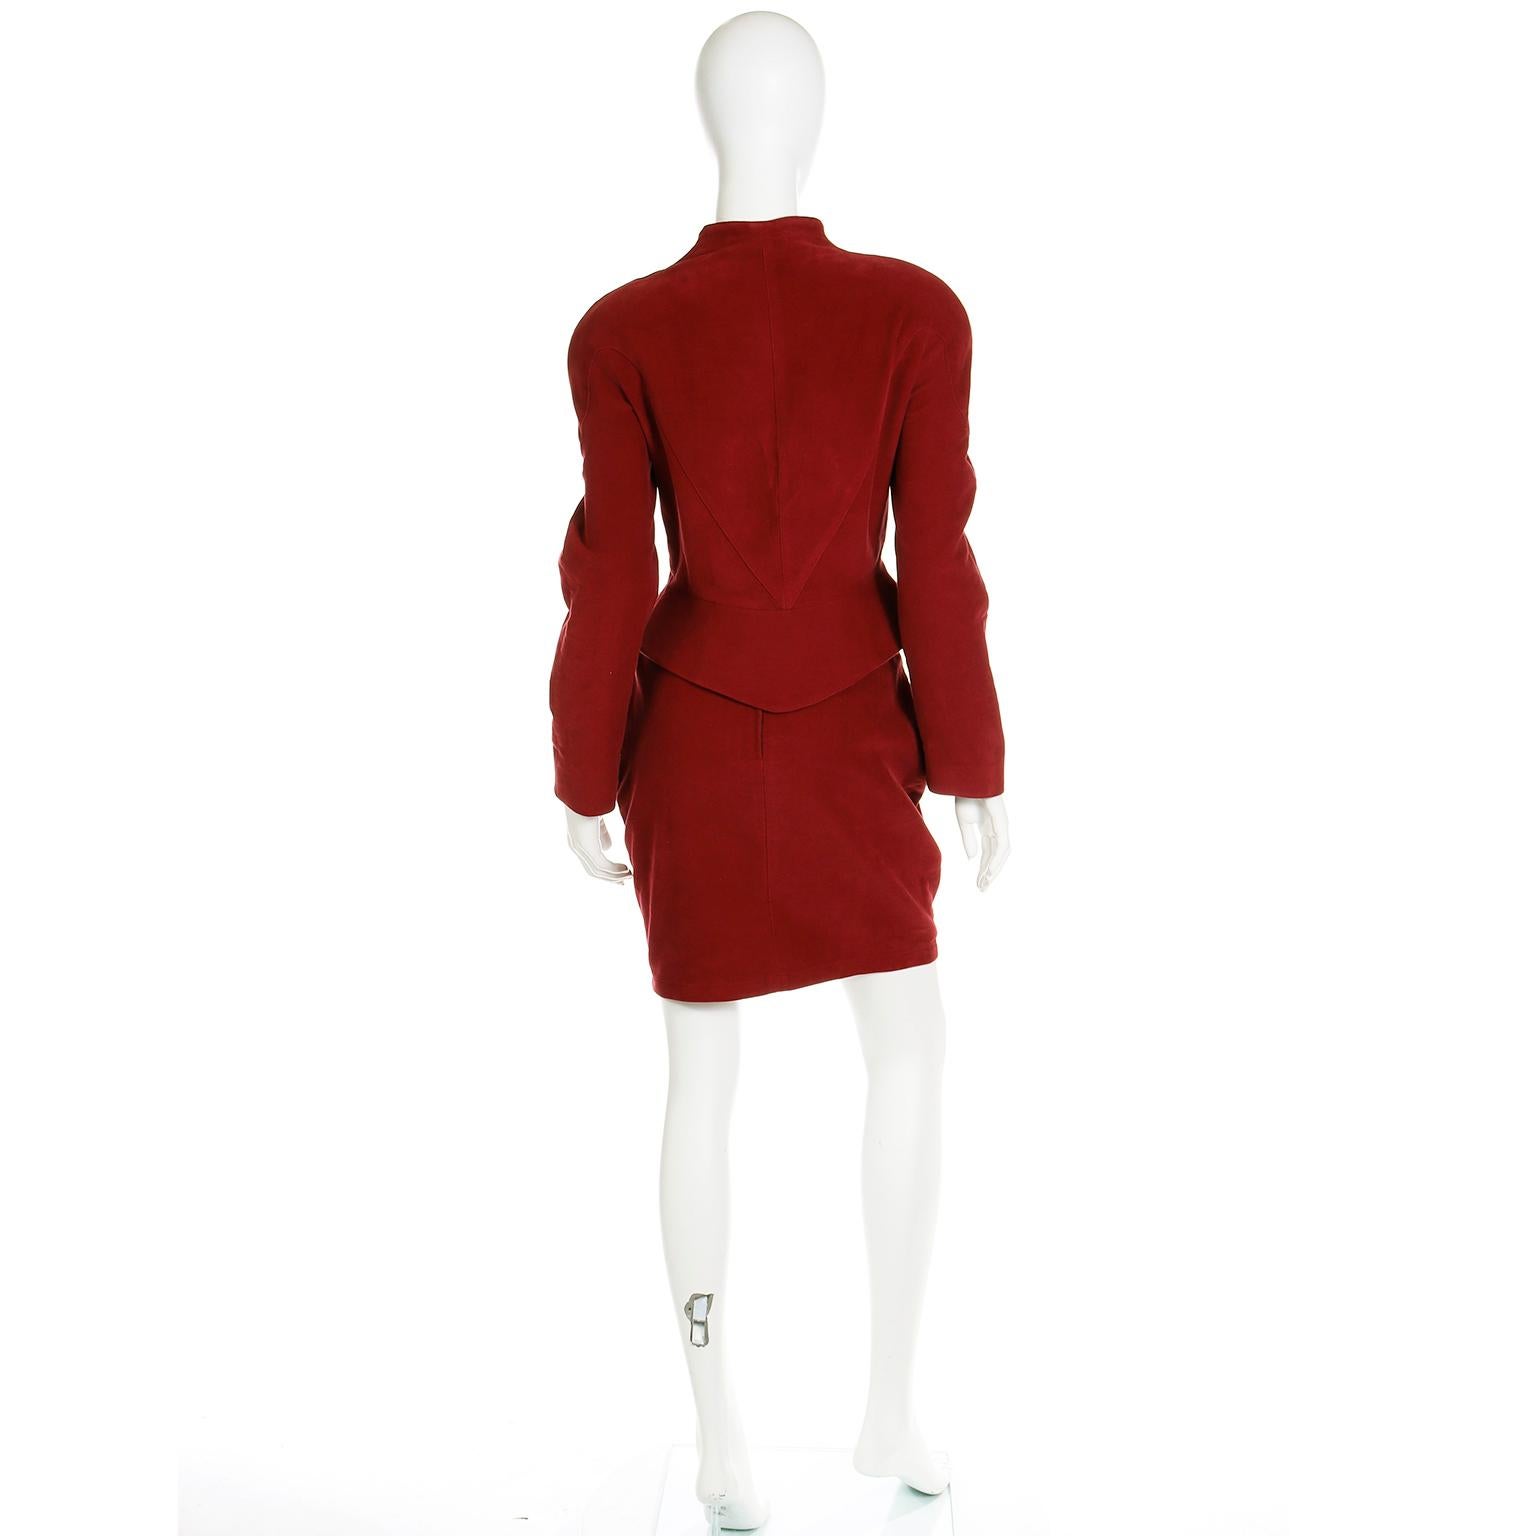 Women's Thierry Mugler Vintage 1980s Brick Red Jacket & Skirt Suit Deadstock w Tags